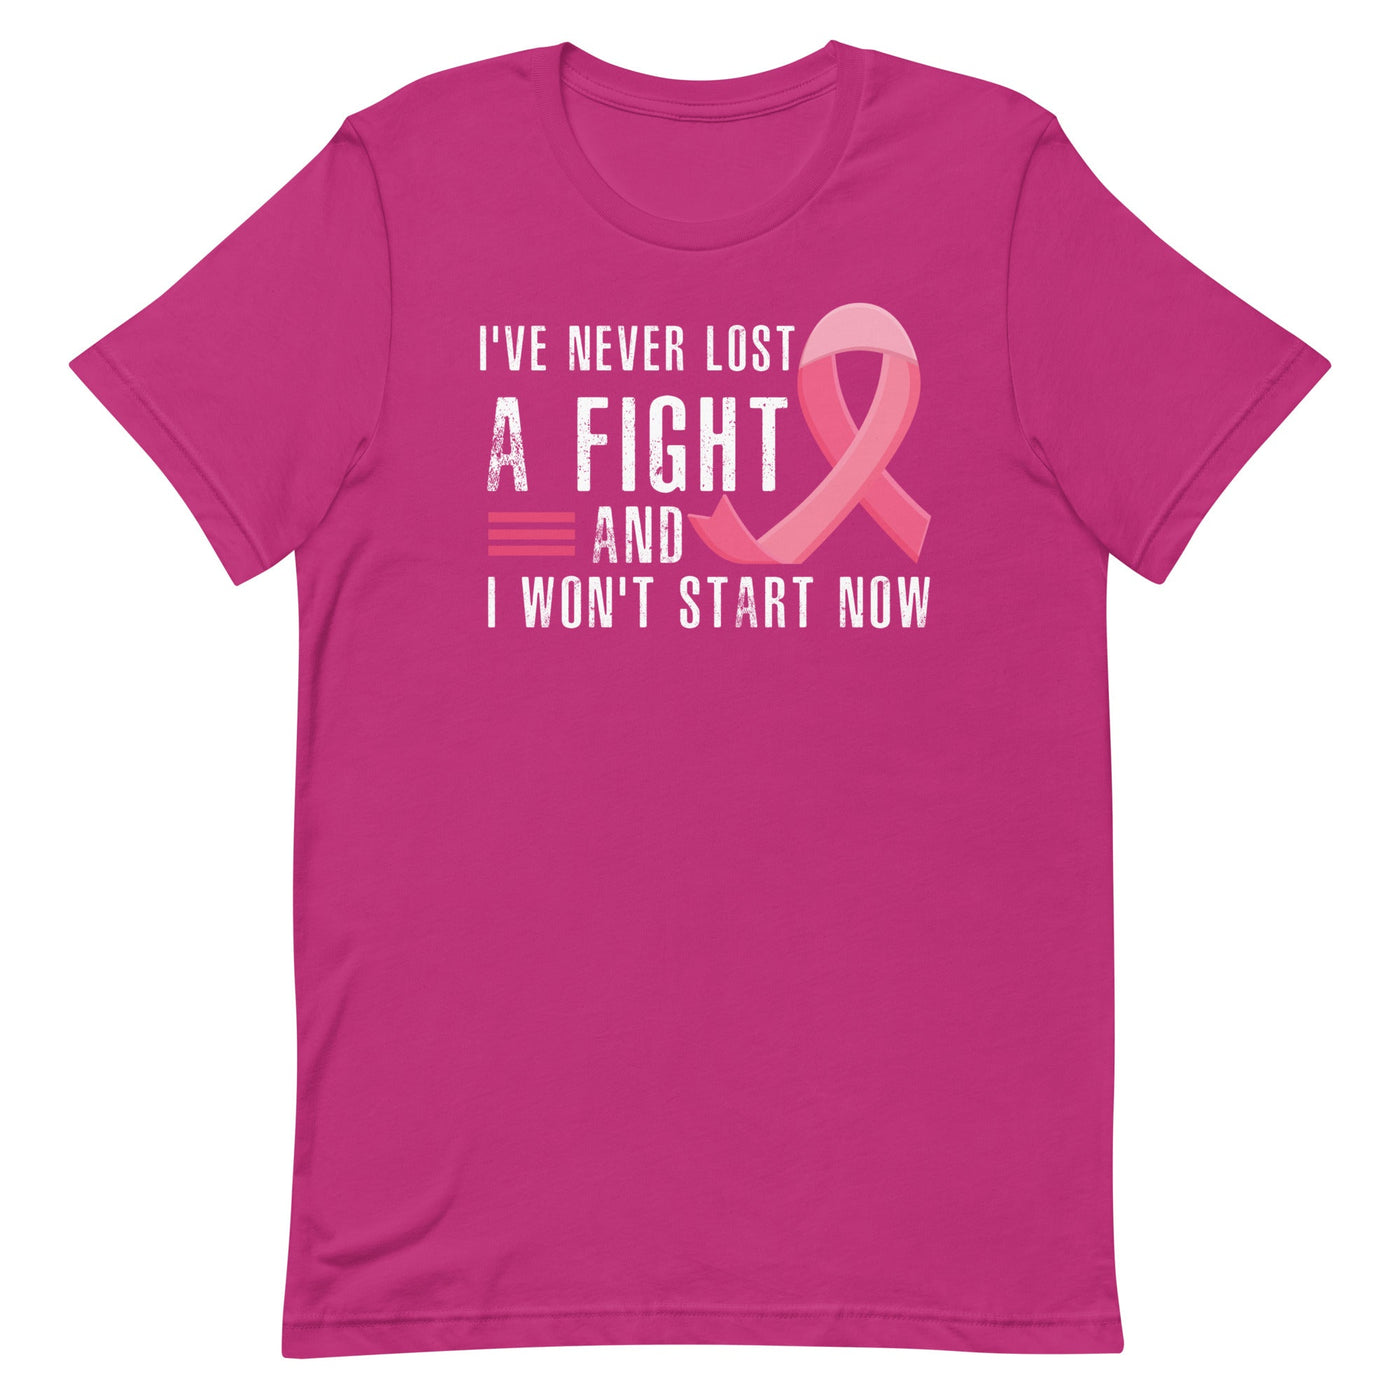 I NEVER LOST A FIGHT AND I WON'T START NOW WOMEN'S T-SHIRT- WHITE AND PINK FONT Berry S 